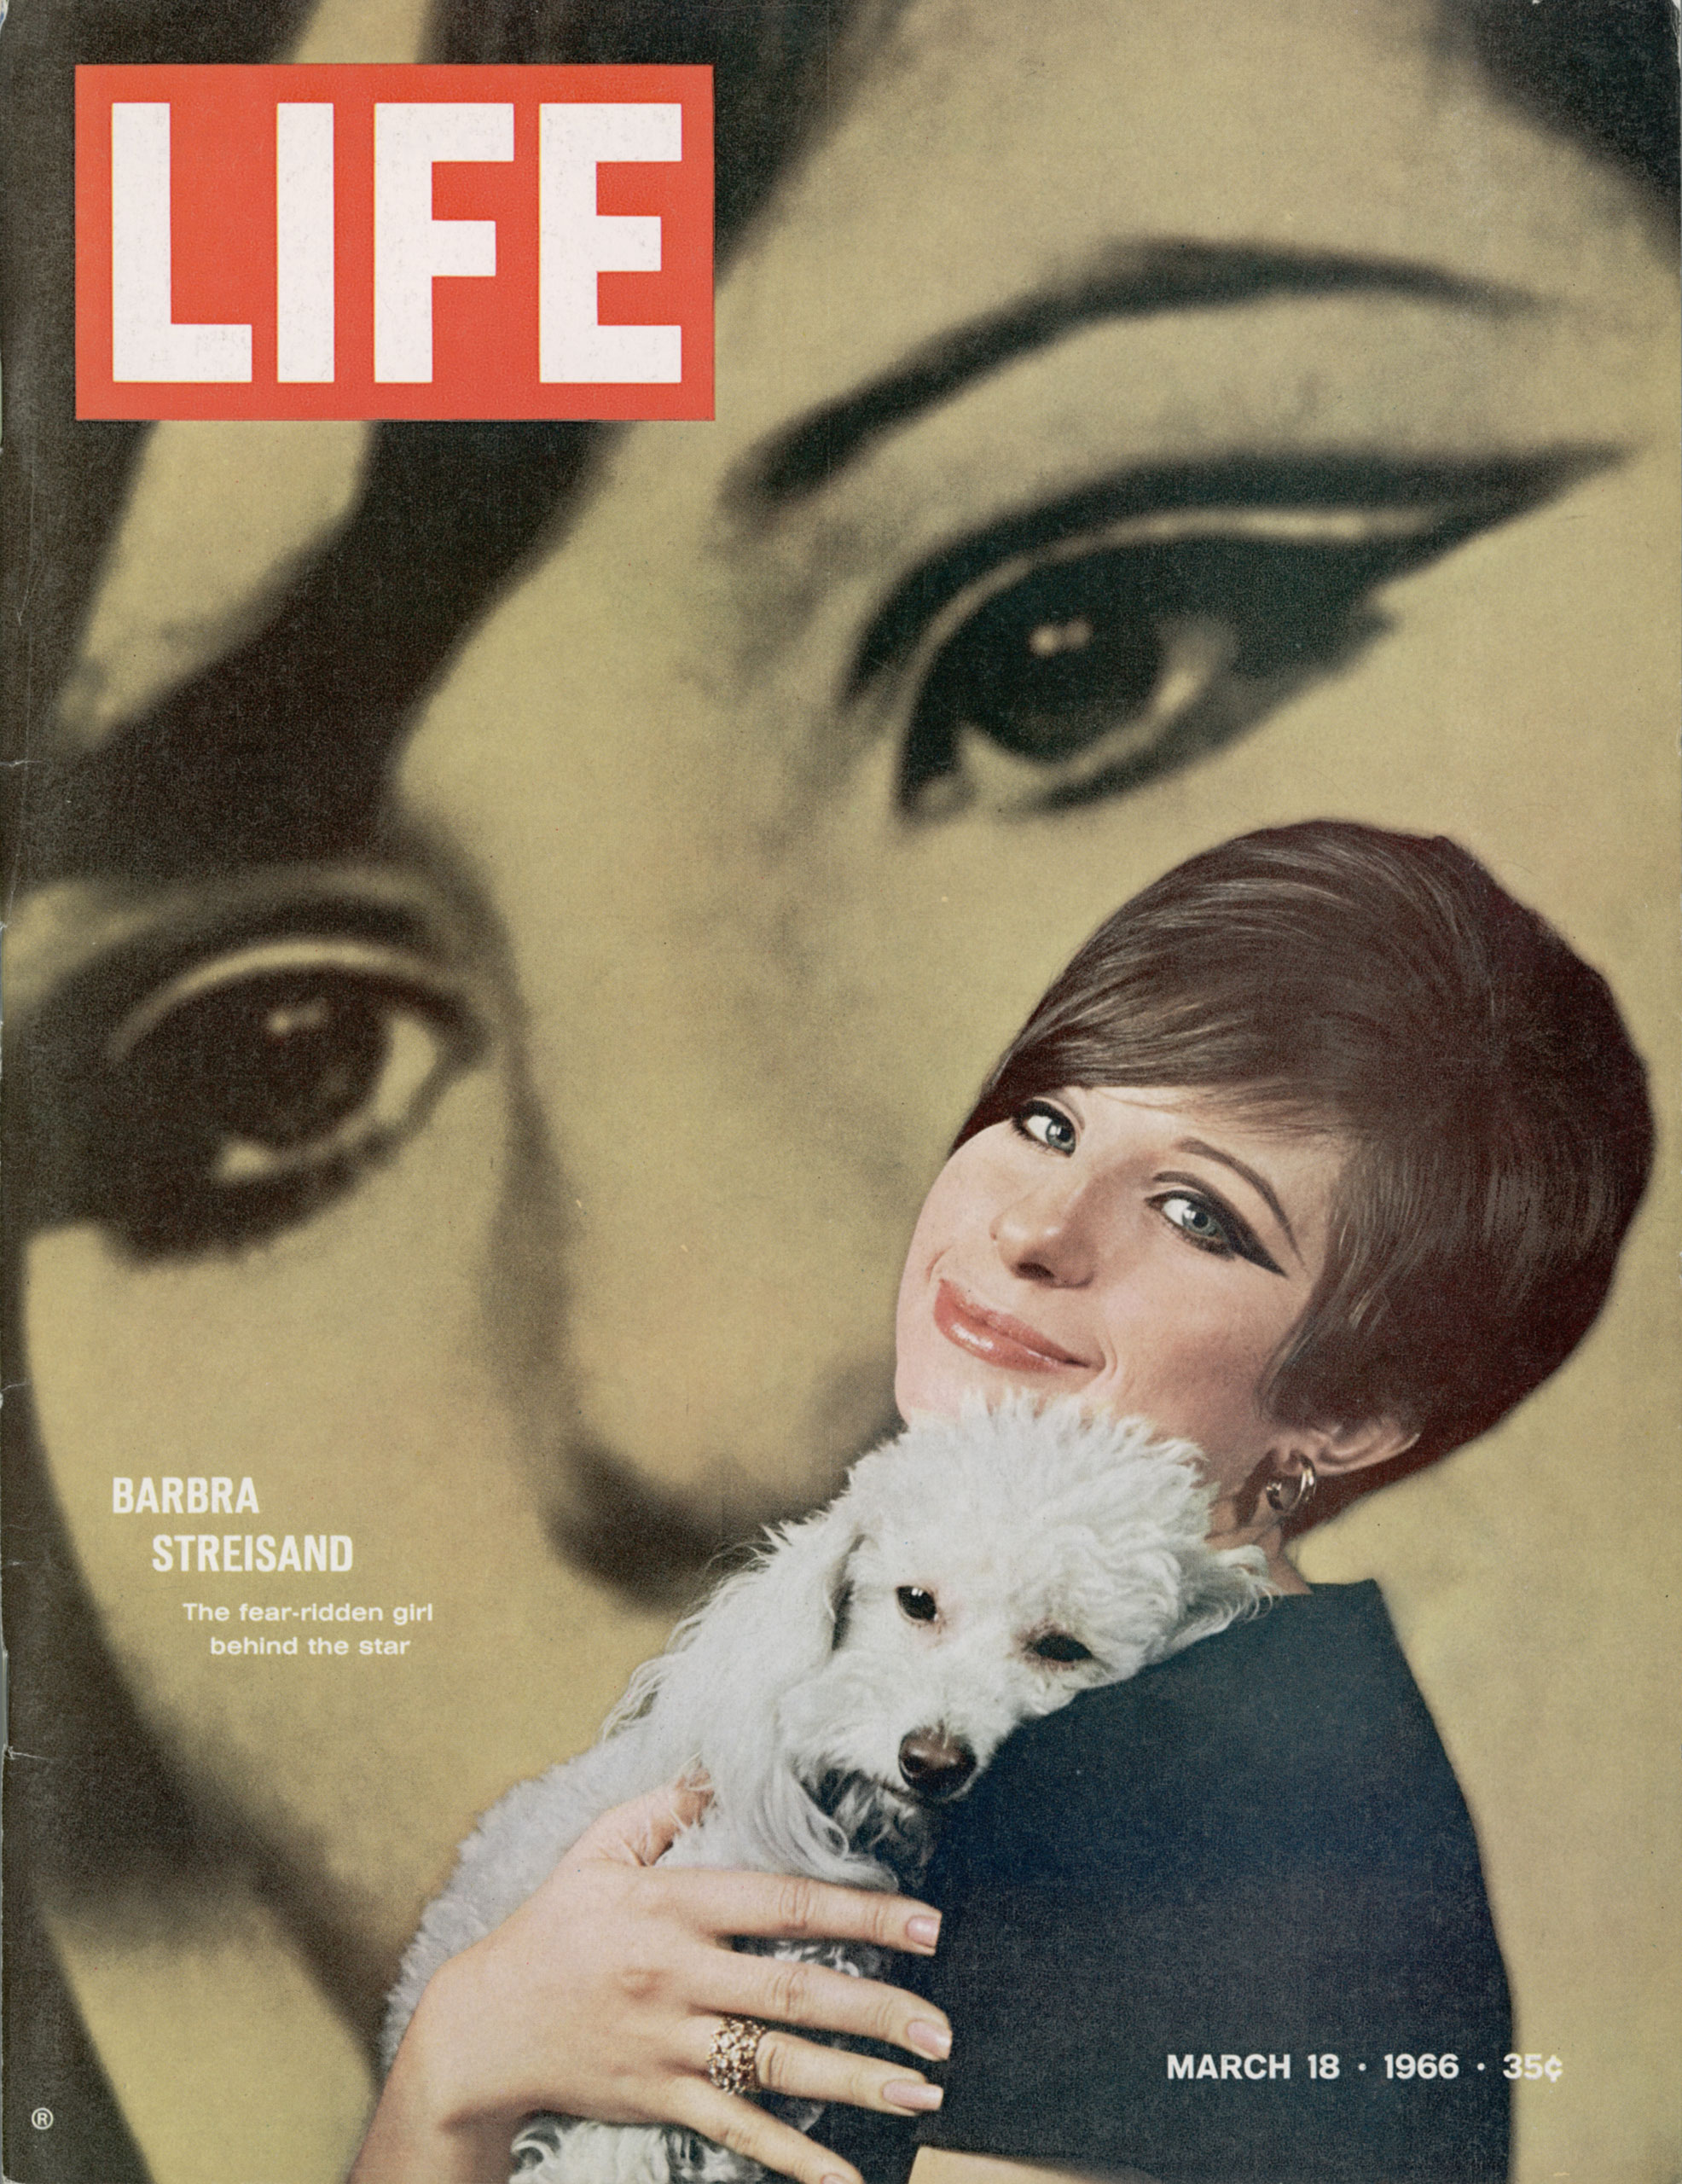 LIFE Magazine March 18, 1966 cover with Barbara Streisand.